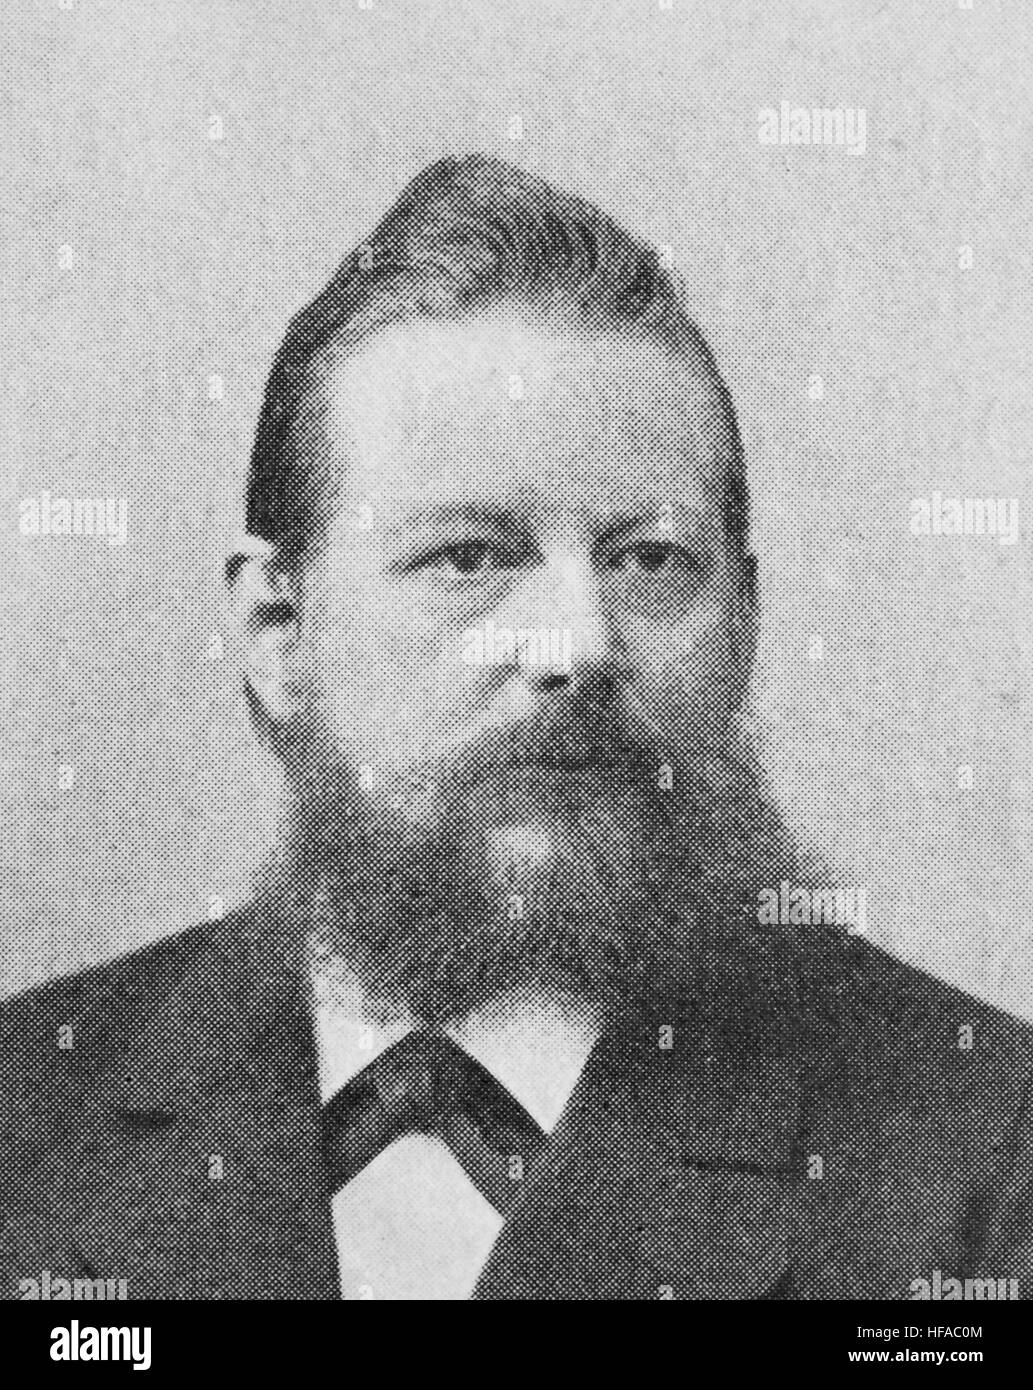 Wilhelm Windelband, 1848-1915, was a German philosopher of the Baden School., reproduction photo from the year 1895, digital improved Stock Photo